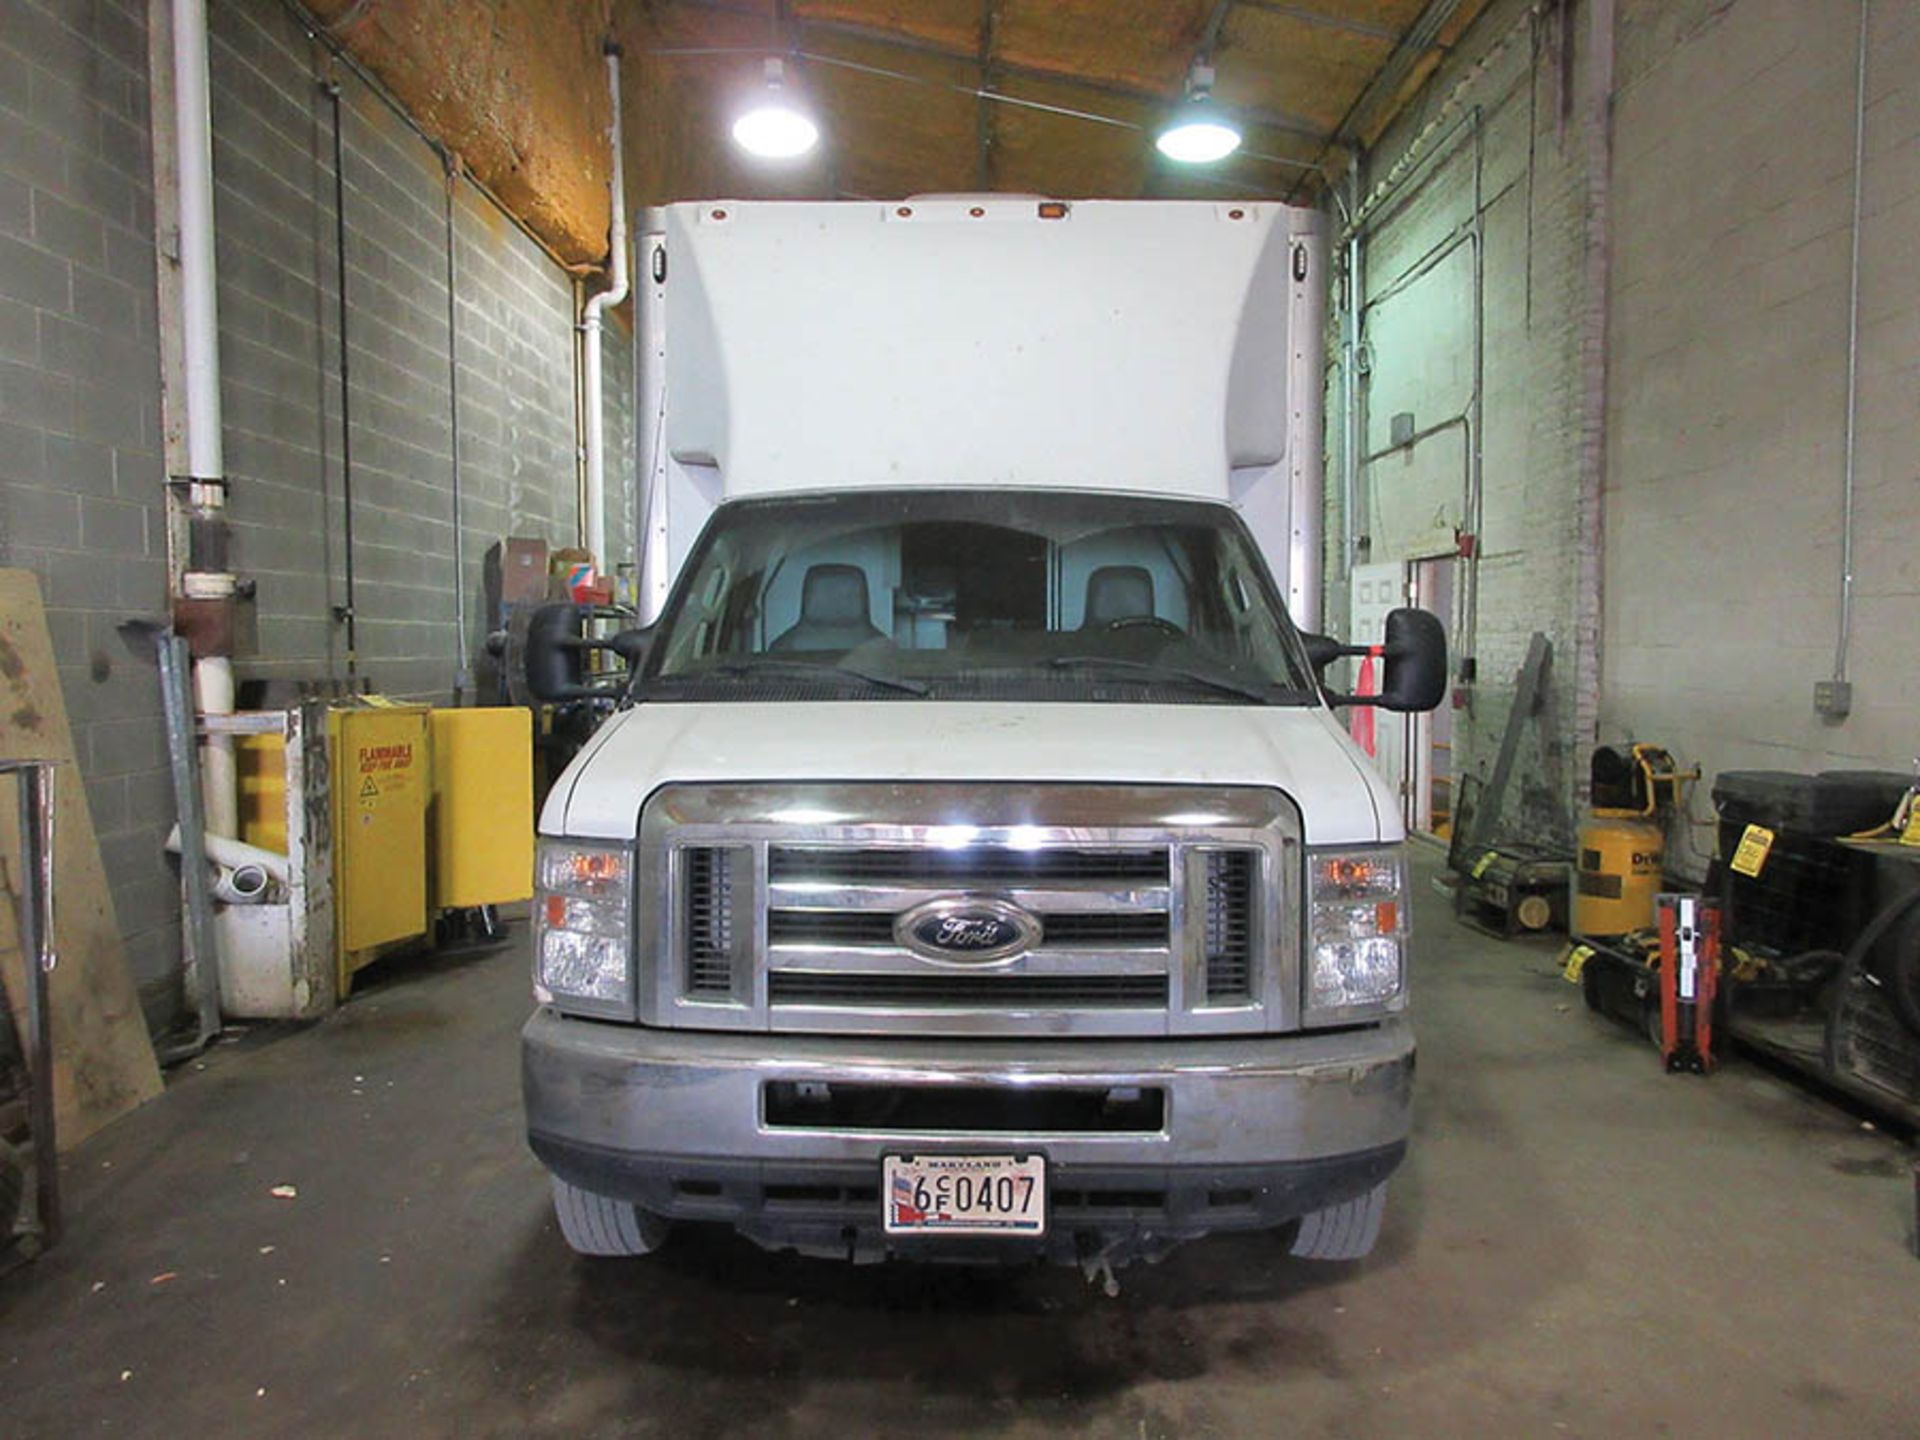 (2013) FORD E450 SUPER DUTY CCTV TRUCK, AUTOMATIC TRANSMISSION, 76,960 MILES, MAIN & LATERAL - Image 5 of 11